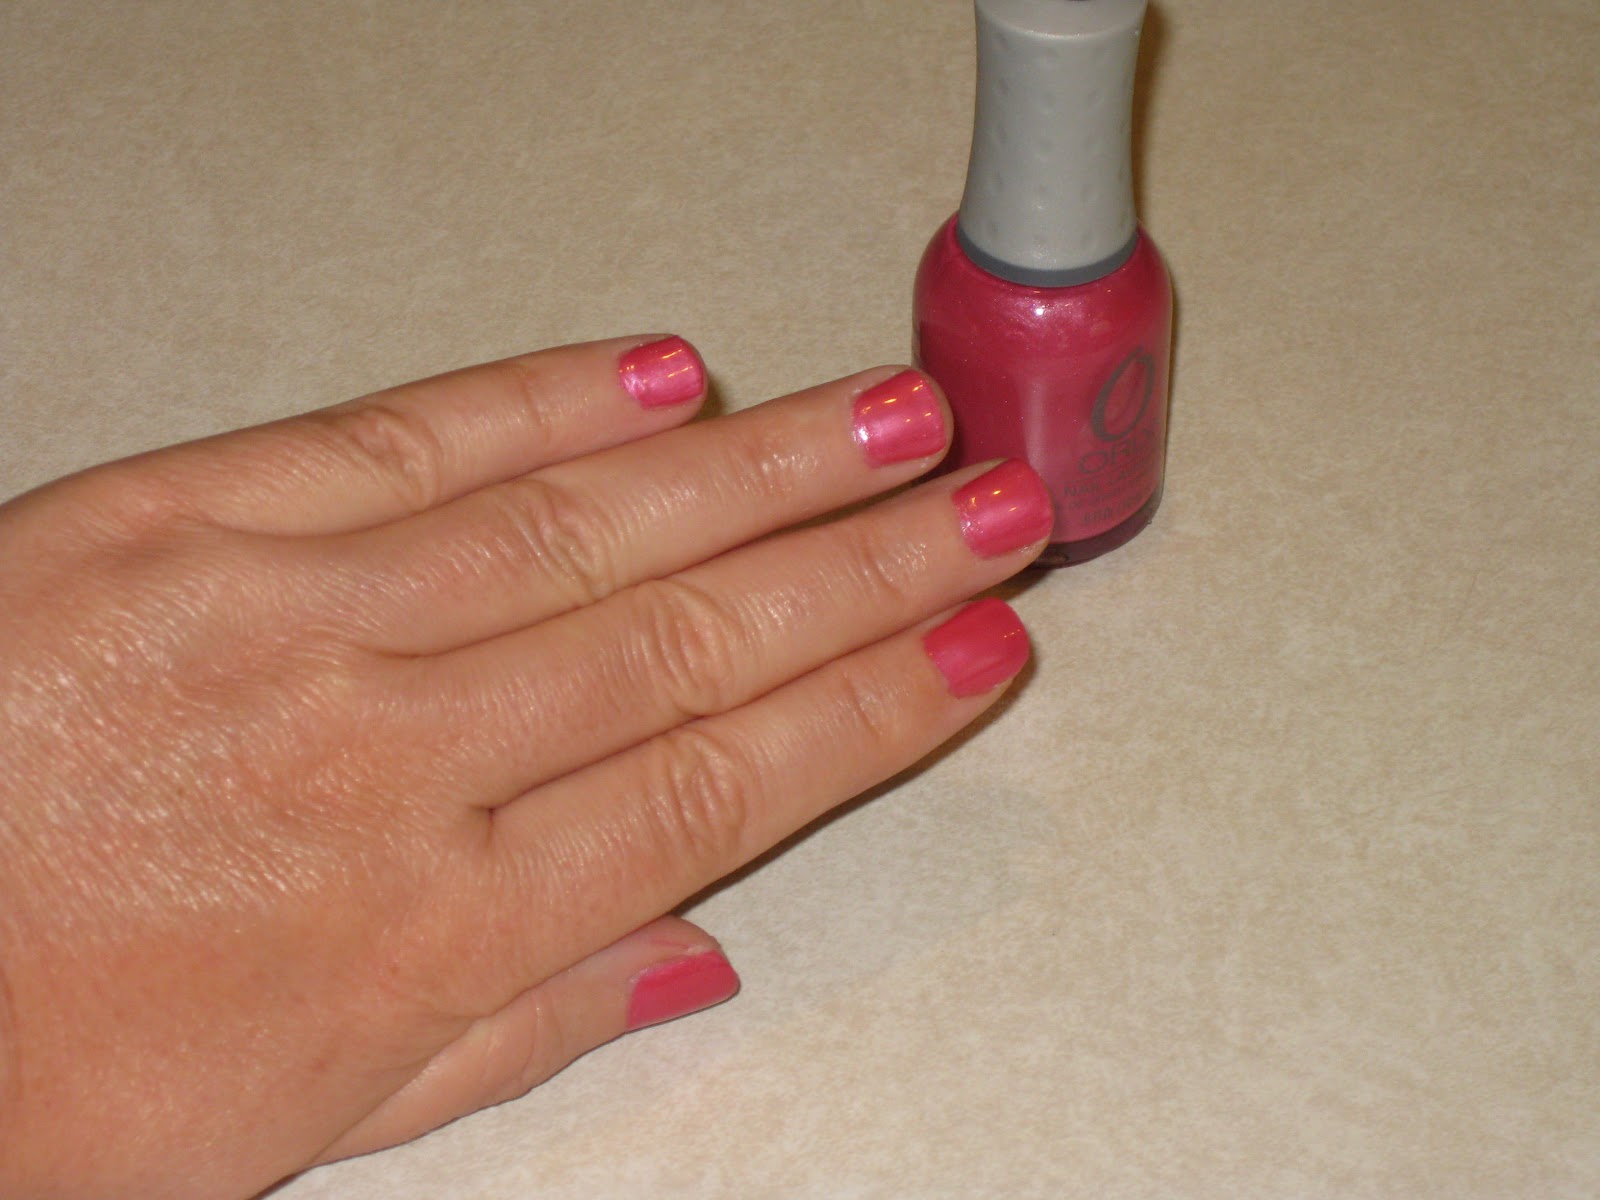 9. Orly Nail Lacquer in "Bare Rose" - wide 2